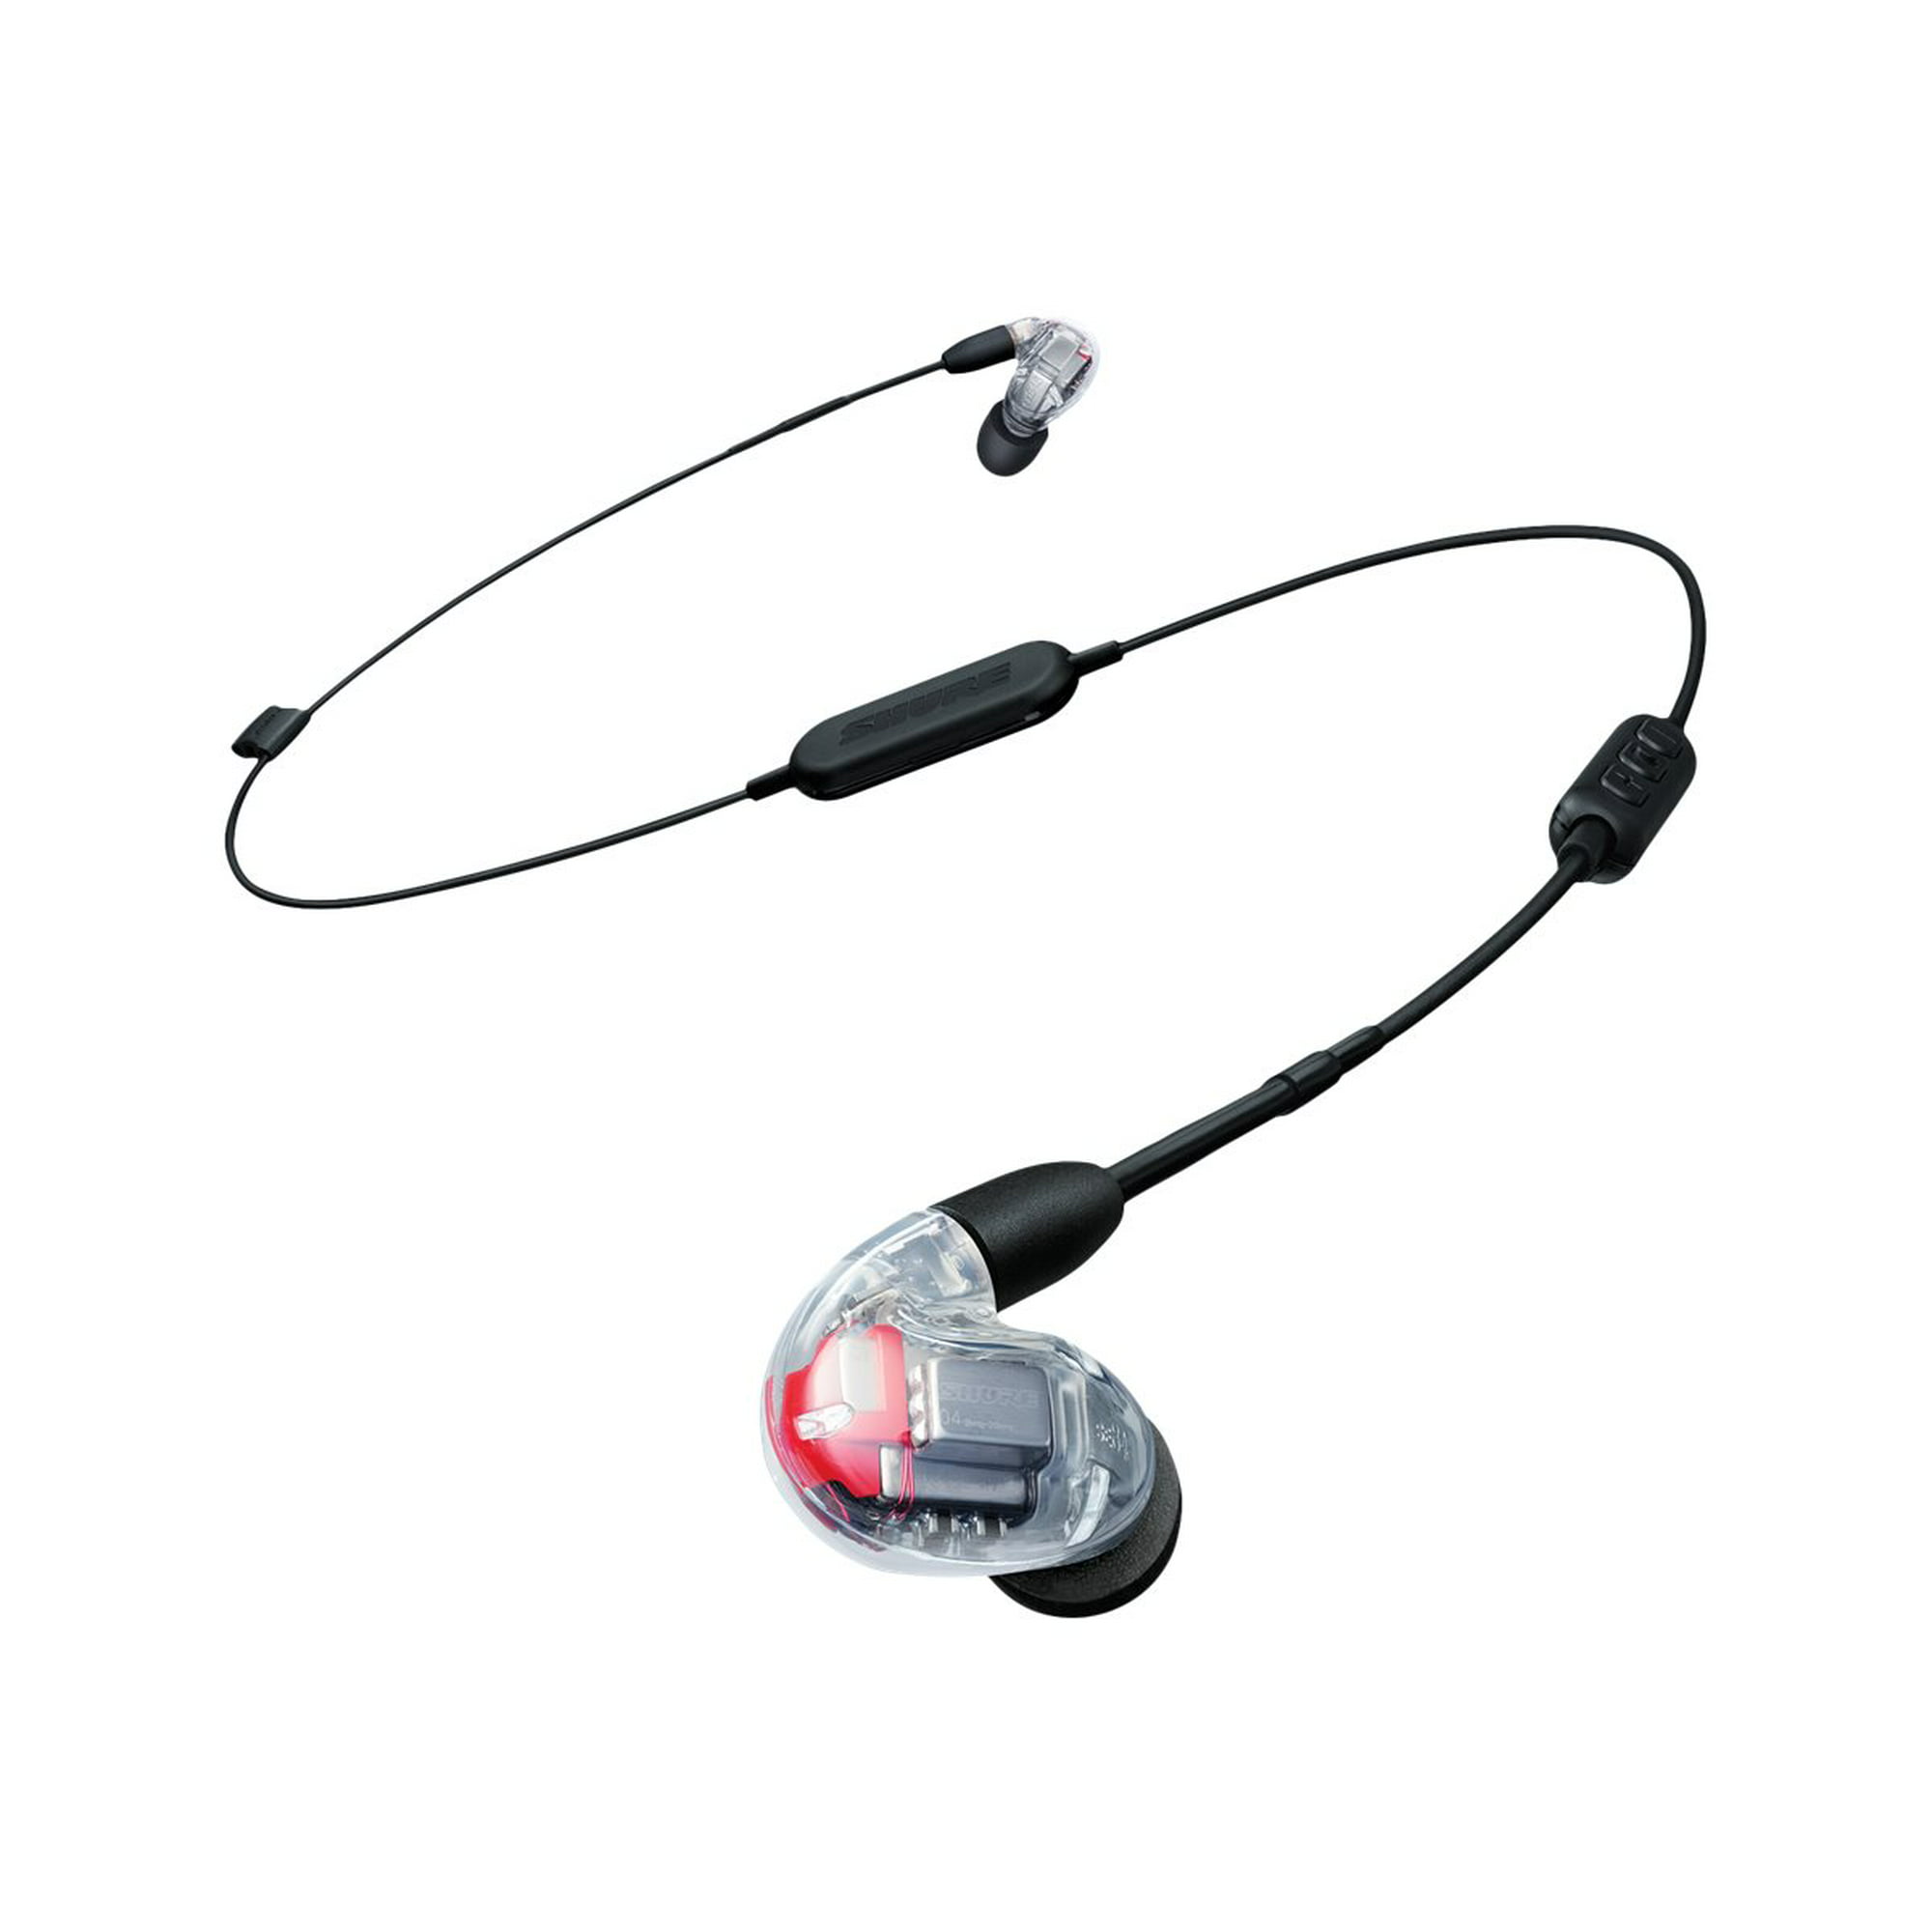 Shure SE846 Sound Isolating - Earphones with mic - in-ear